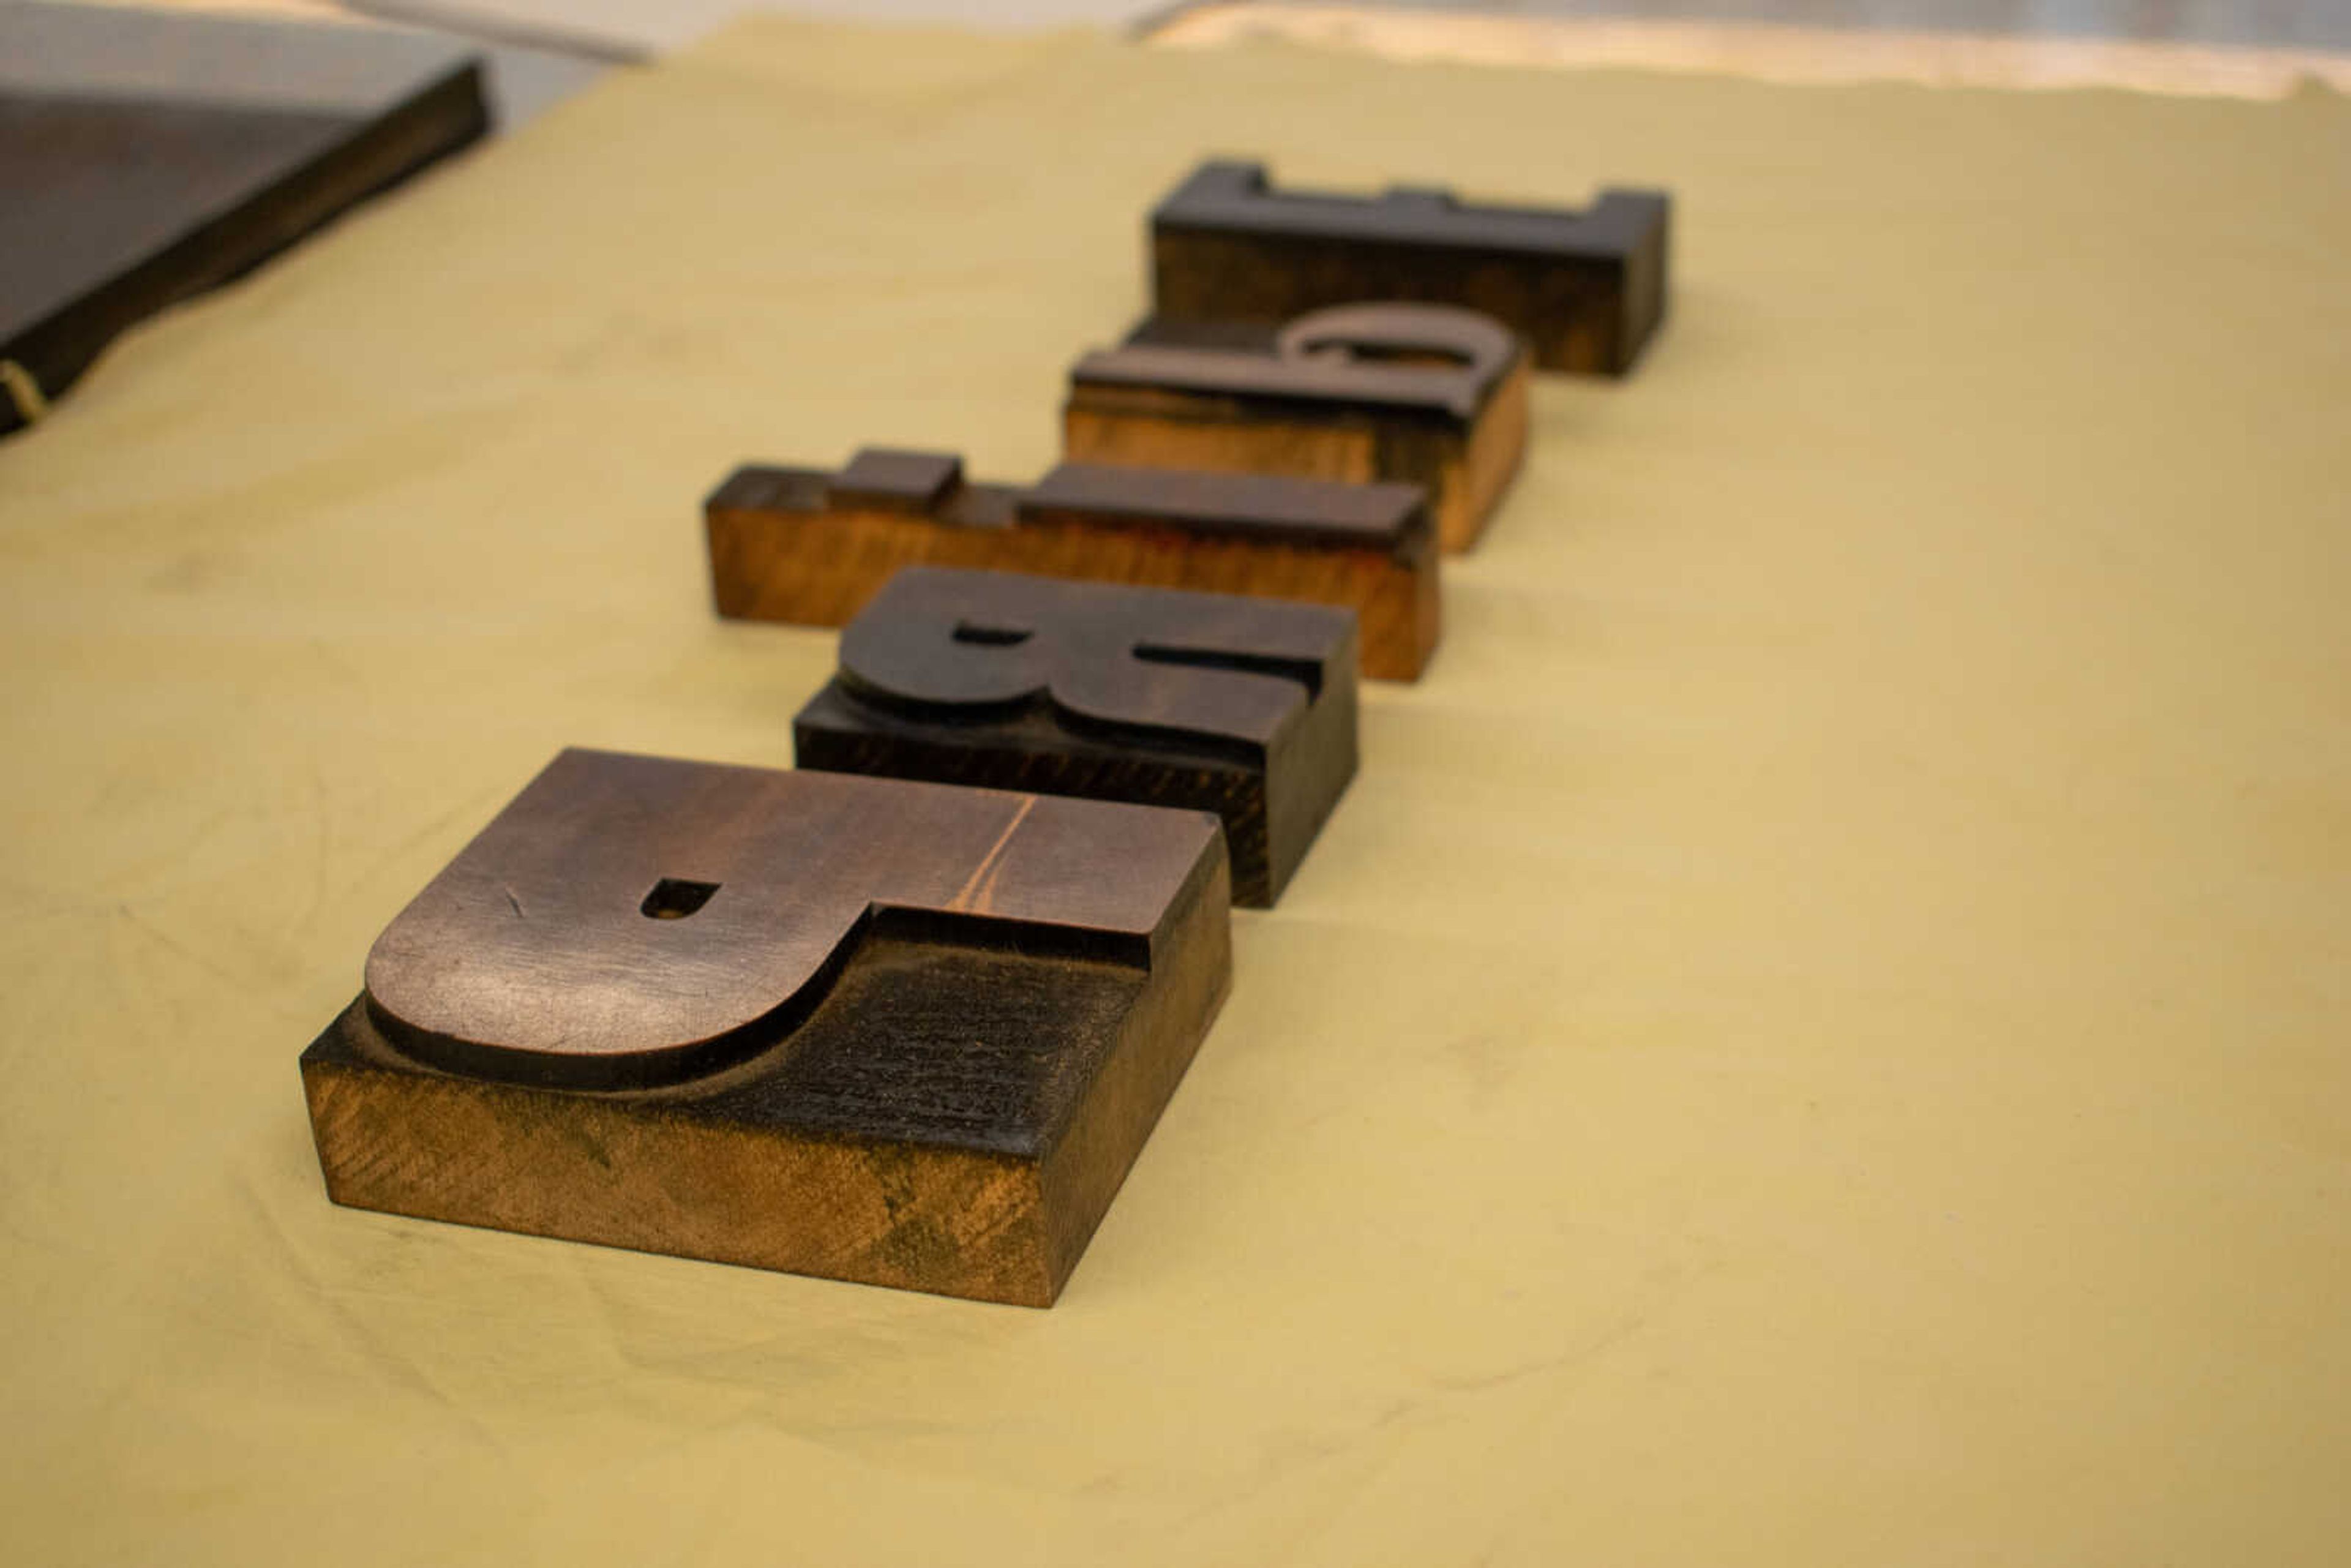 Students use blocks in printmaking to create protest banners on Saturday, Aug. 24 at Catapult.